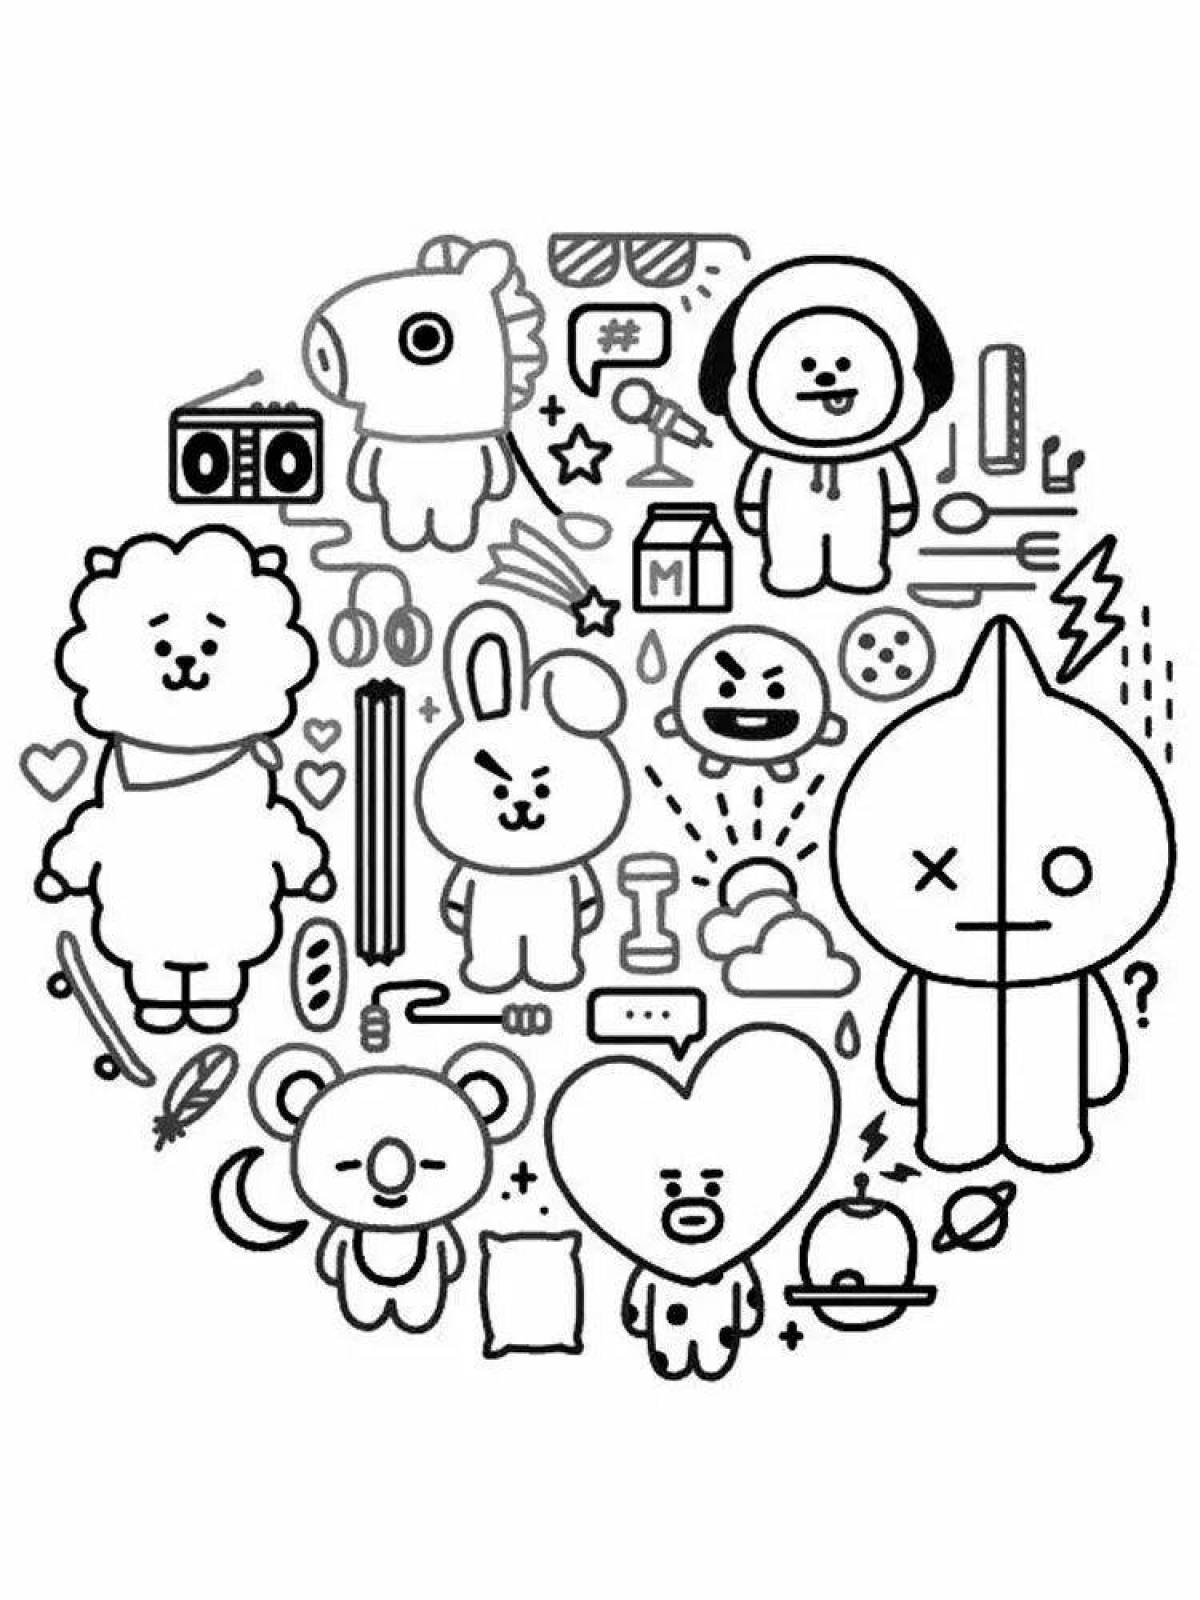 Amazing kpop coloring page